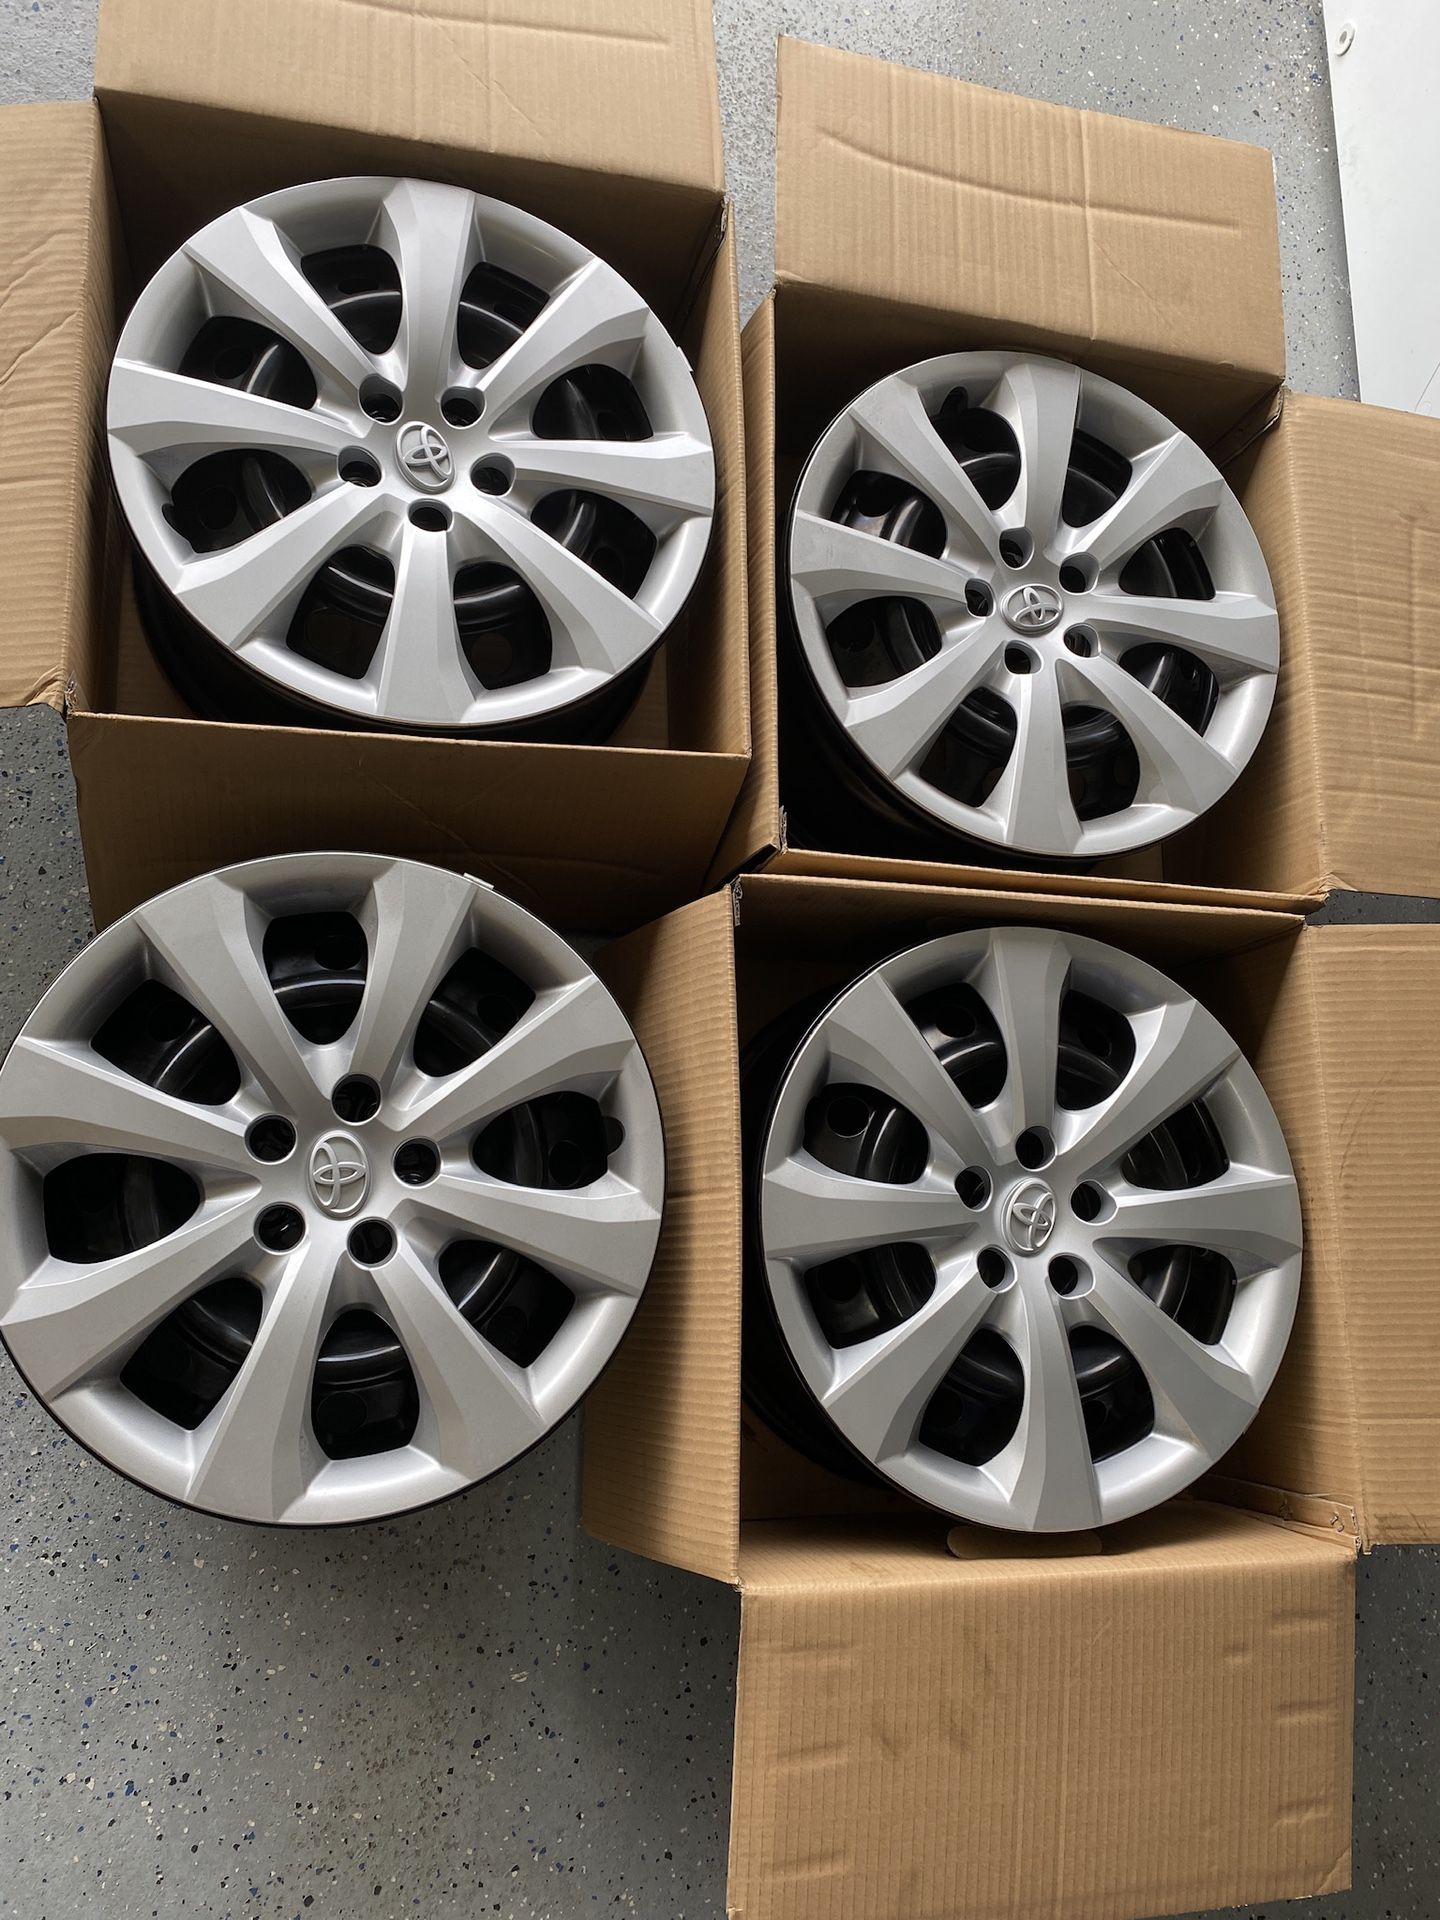 New Stock factory rims 16 and hubcaps